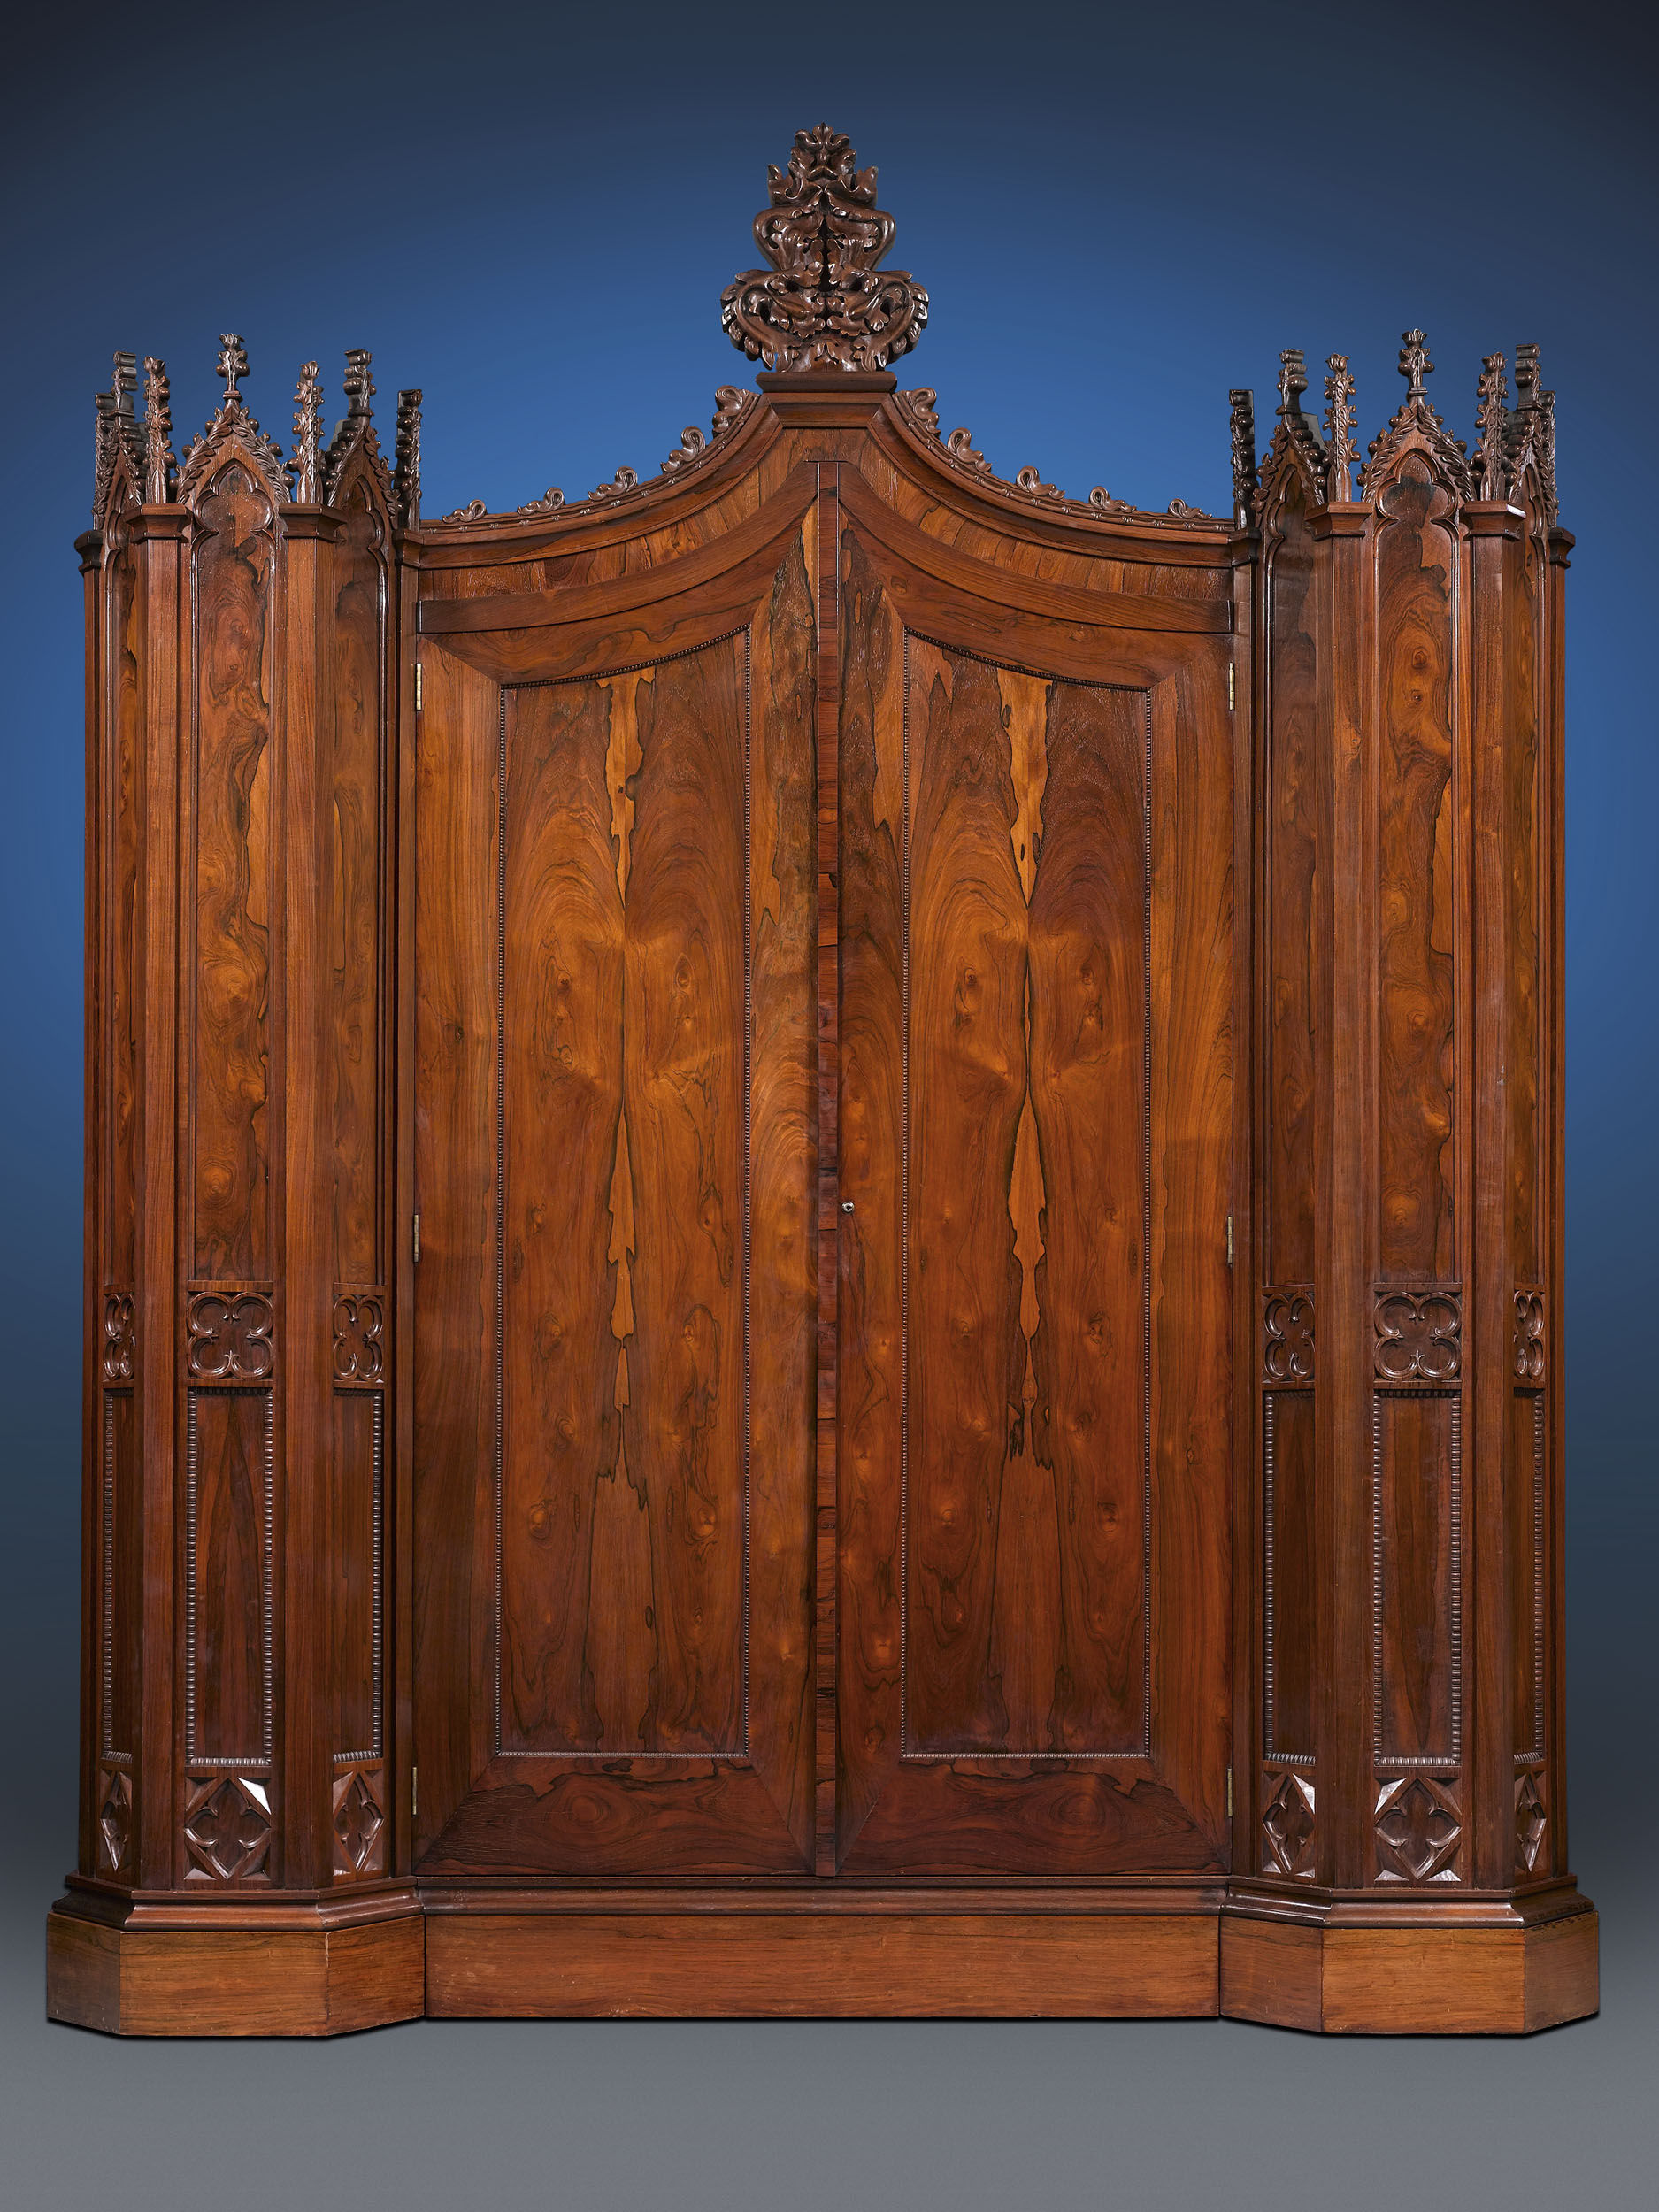 The Henry Clay Rosedown Plantation Armoire is a rare and monumental Gothic Revival Rosewood 'winged' armoire made by Crawford Riddell of Philadelphia for the White House. M.S. Rau Antiques images